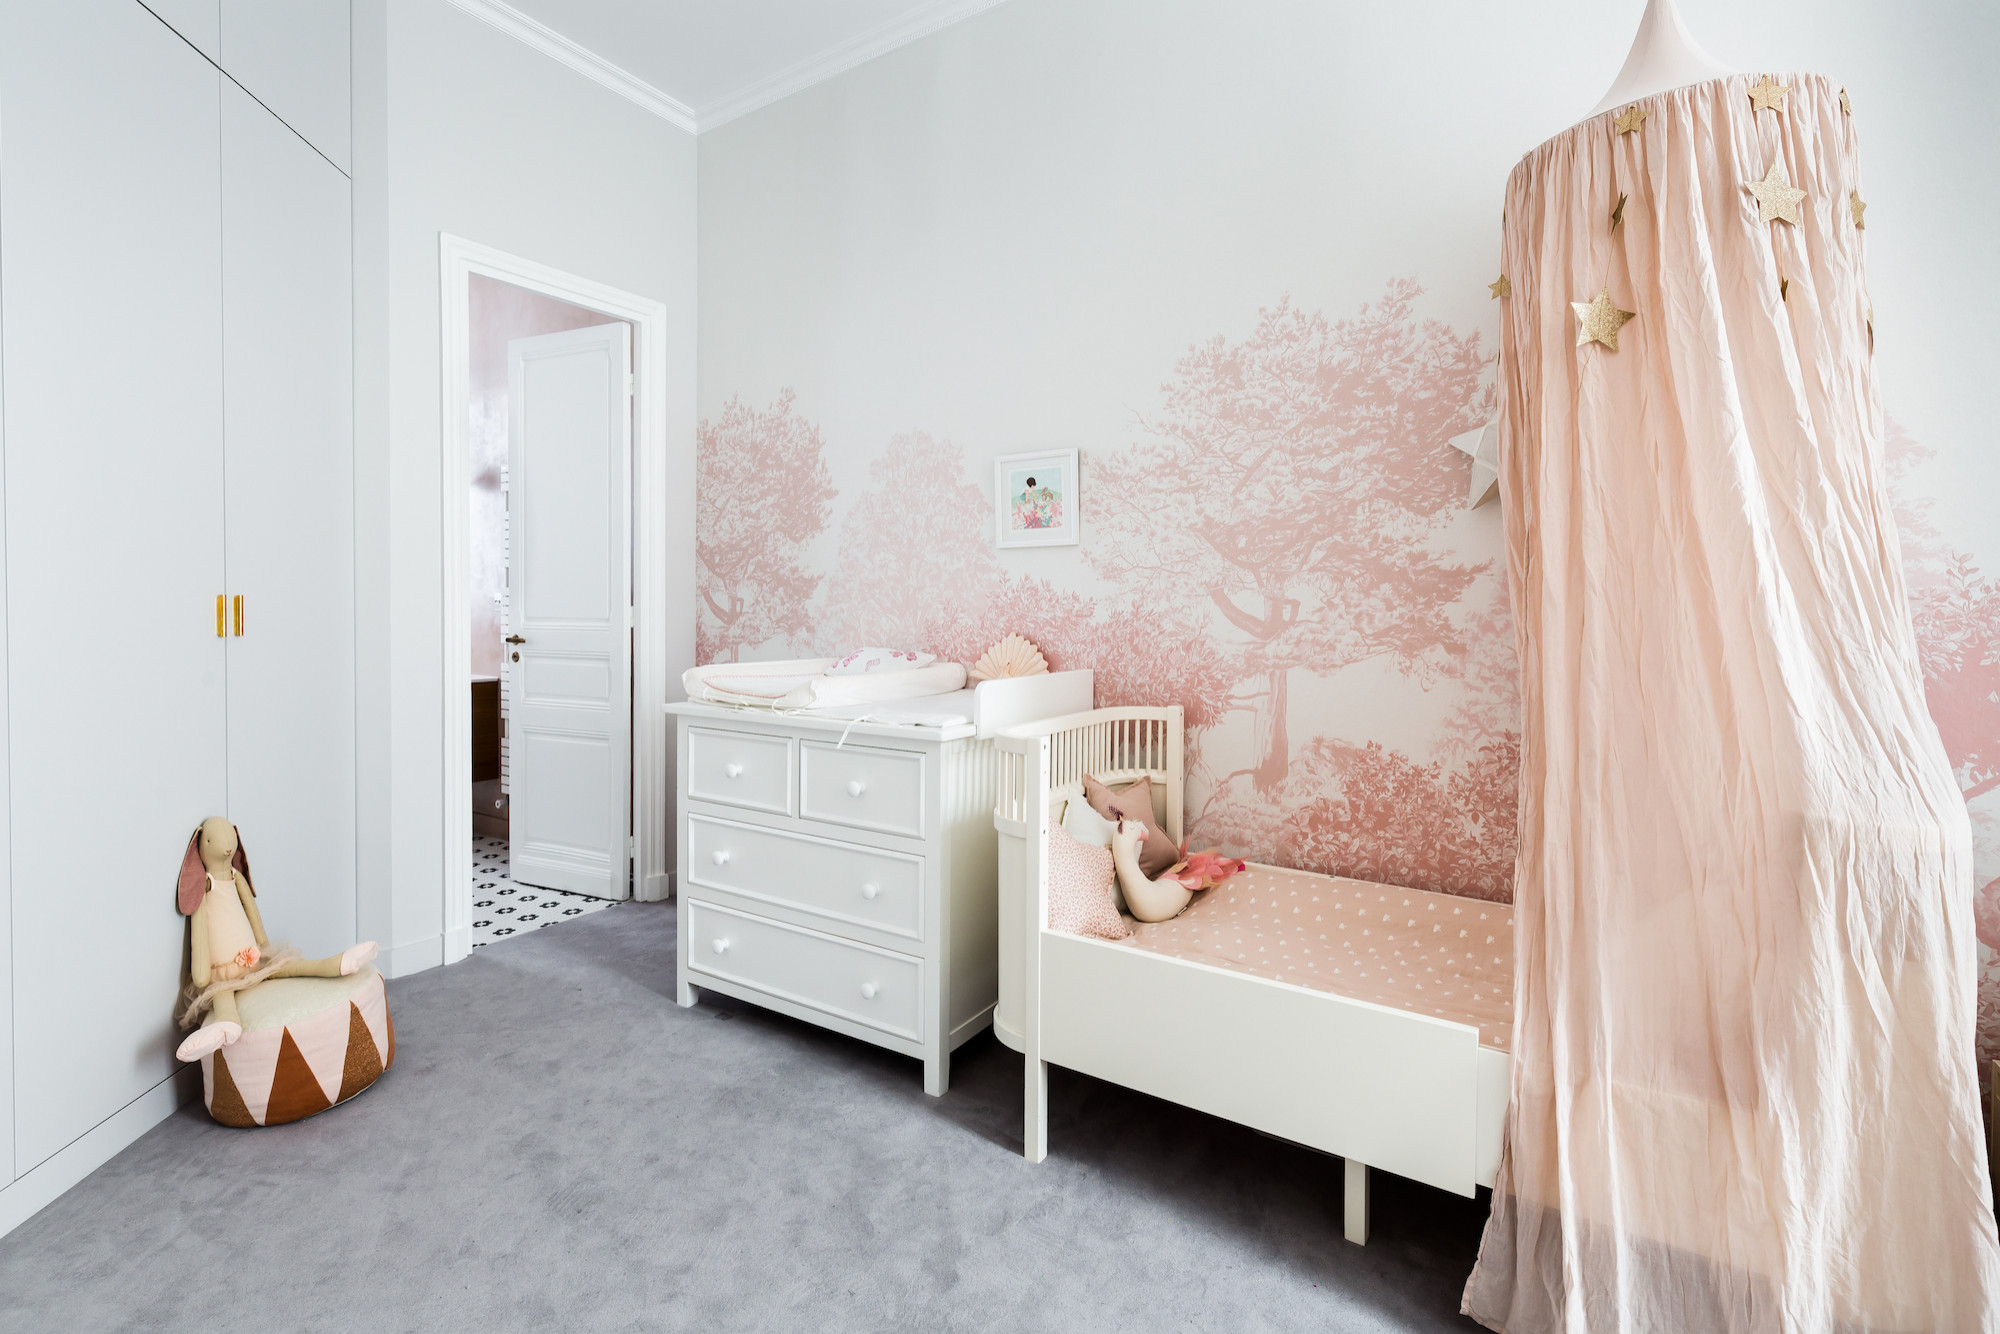 75 Baby and Kids' Ideas You'll Love - January, 2023 | Houzz